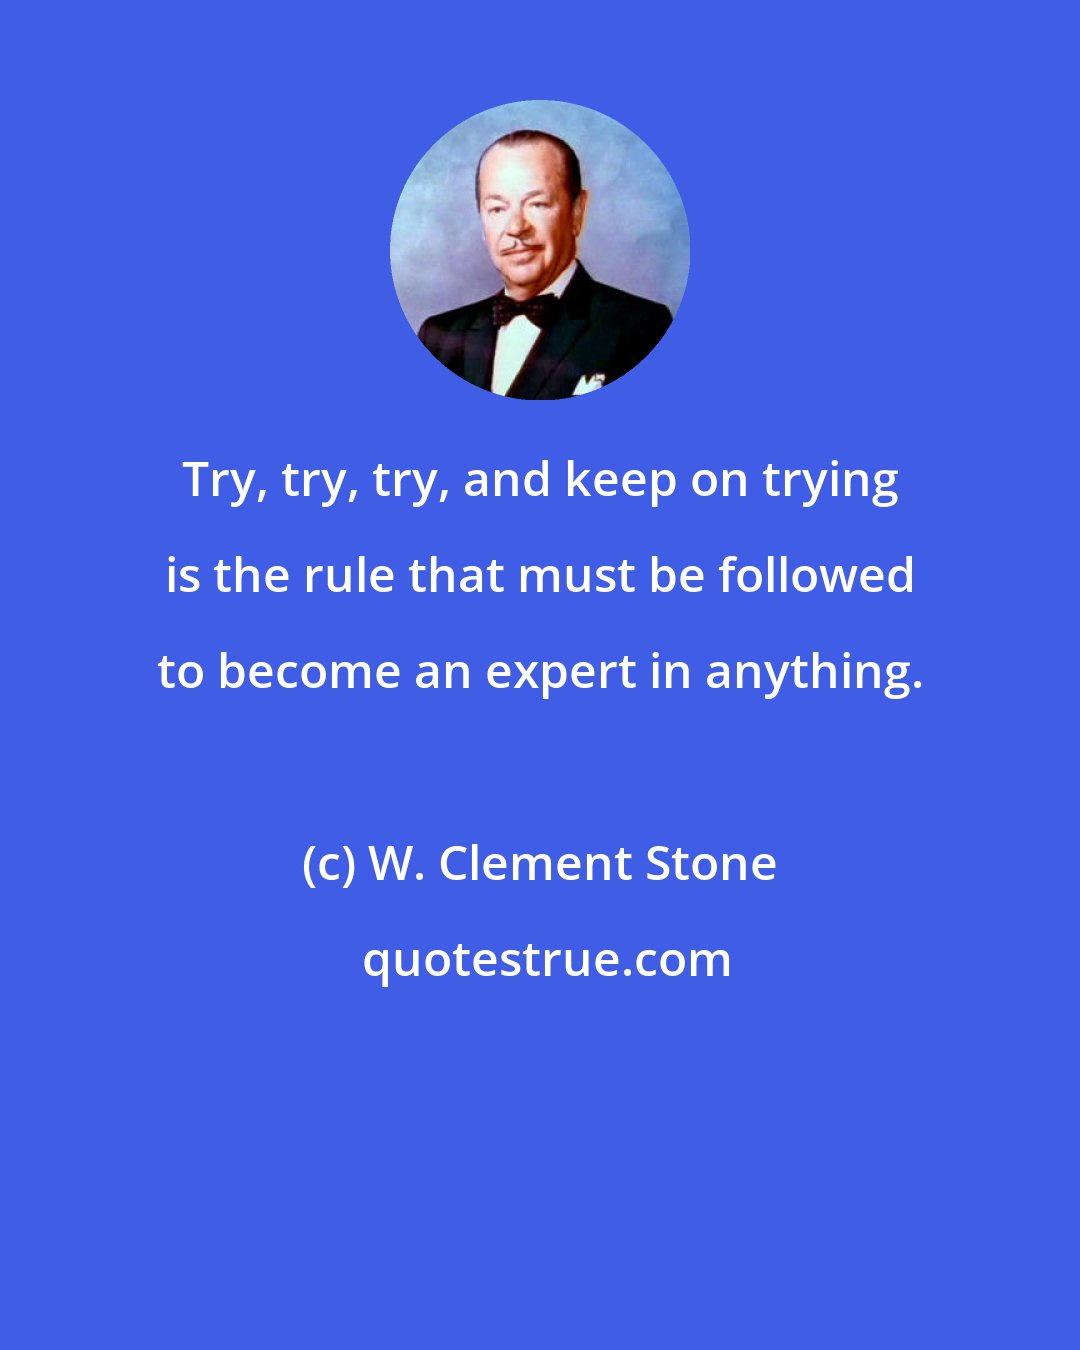 W. Clement Stone: Try, try, try, and keep on trying is the rule that must be followed to become an expert in anything.